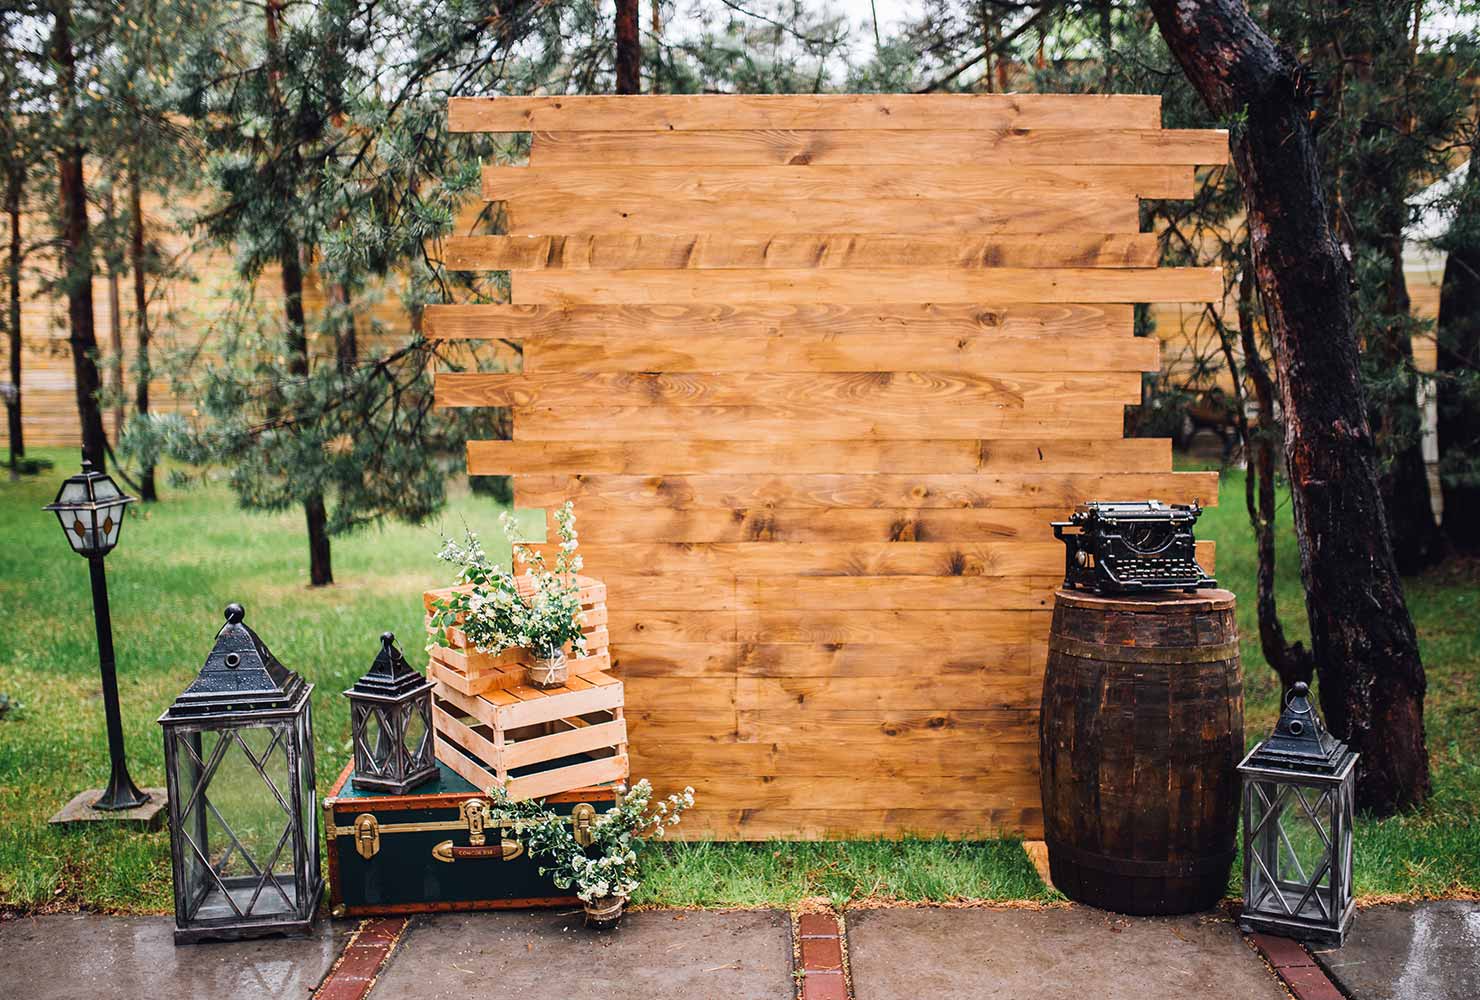 Wooden photobooth backdrop with rustic decor.